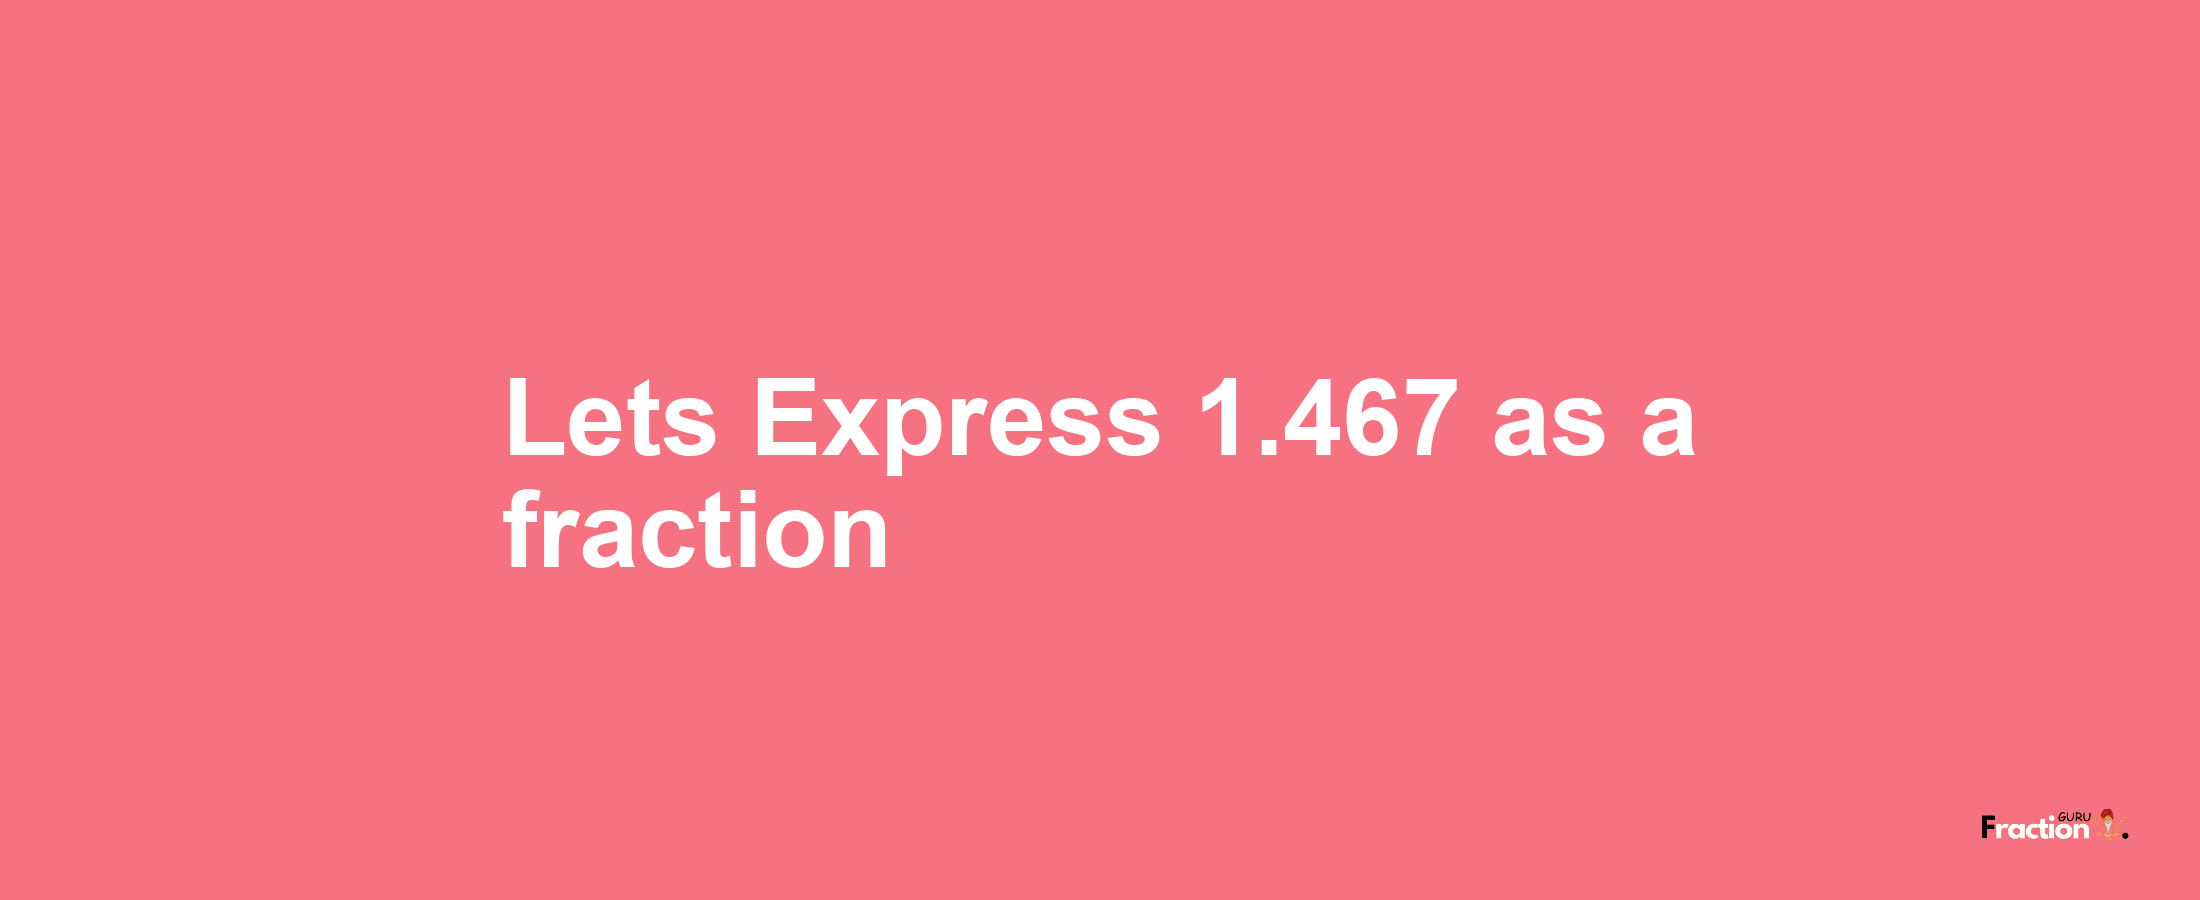 Lets Express 1.467 as afraction